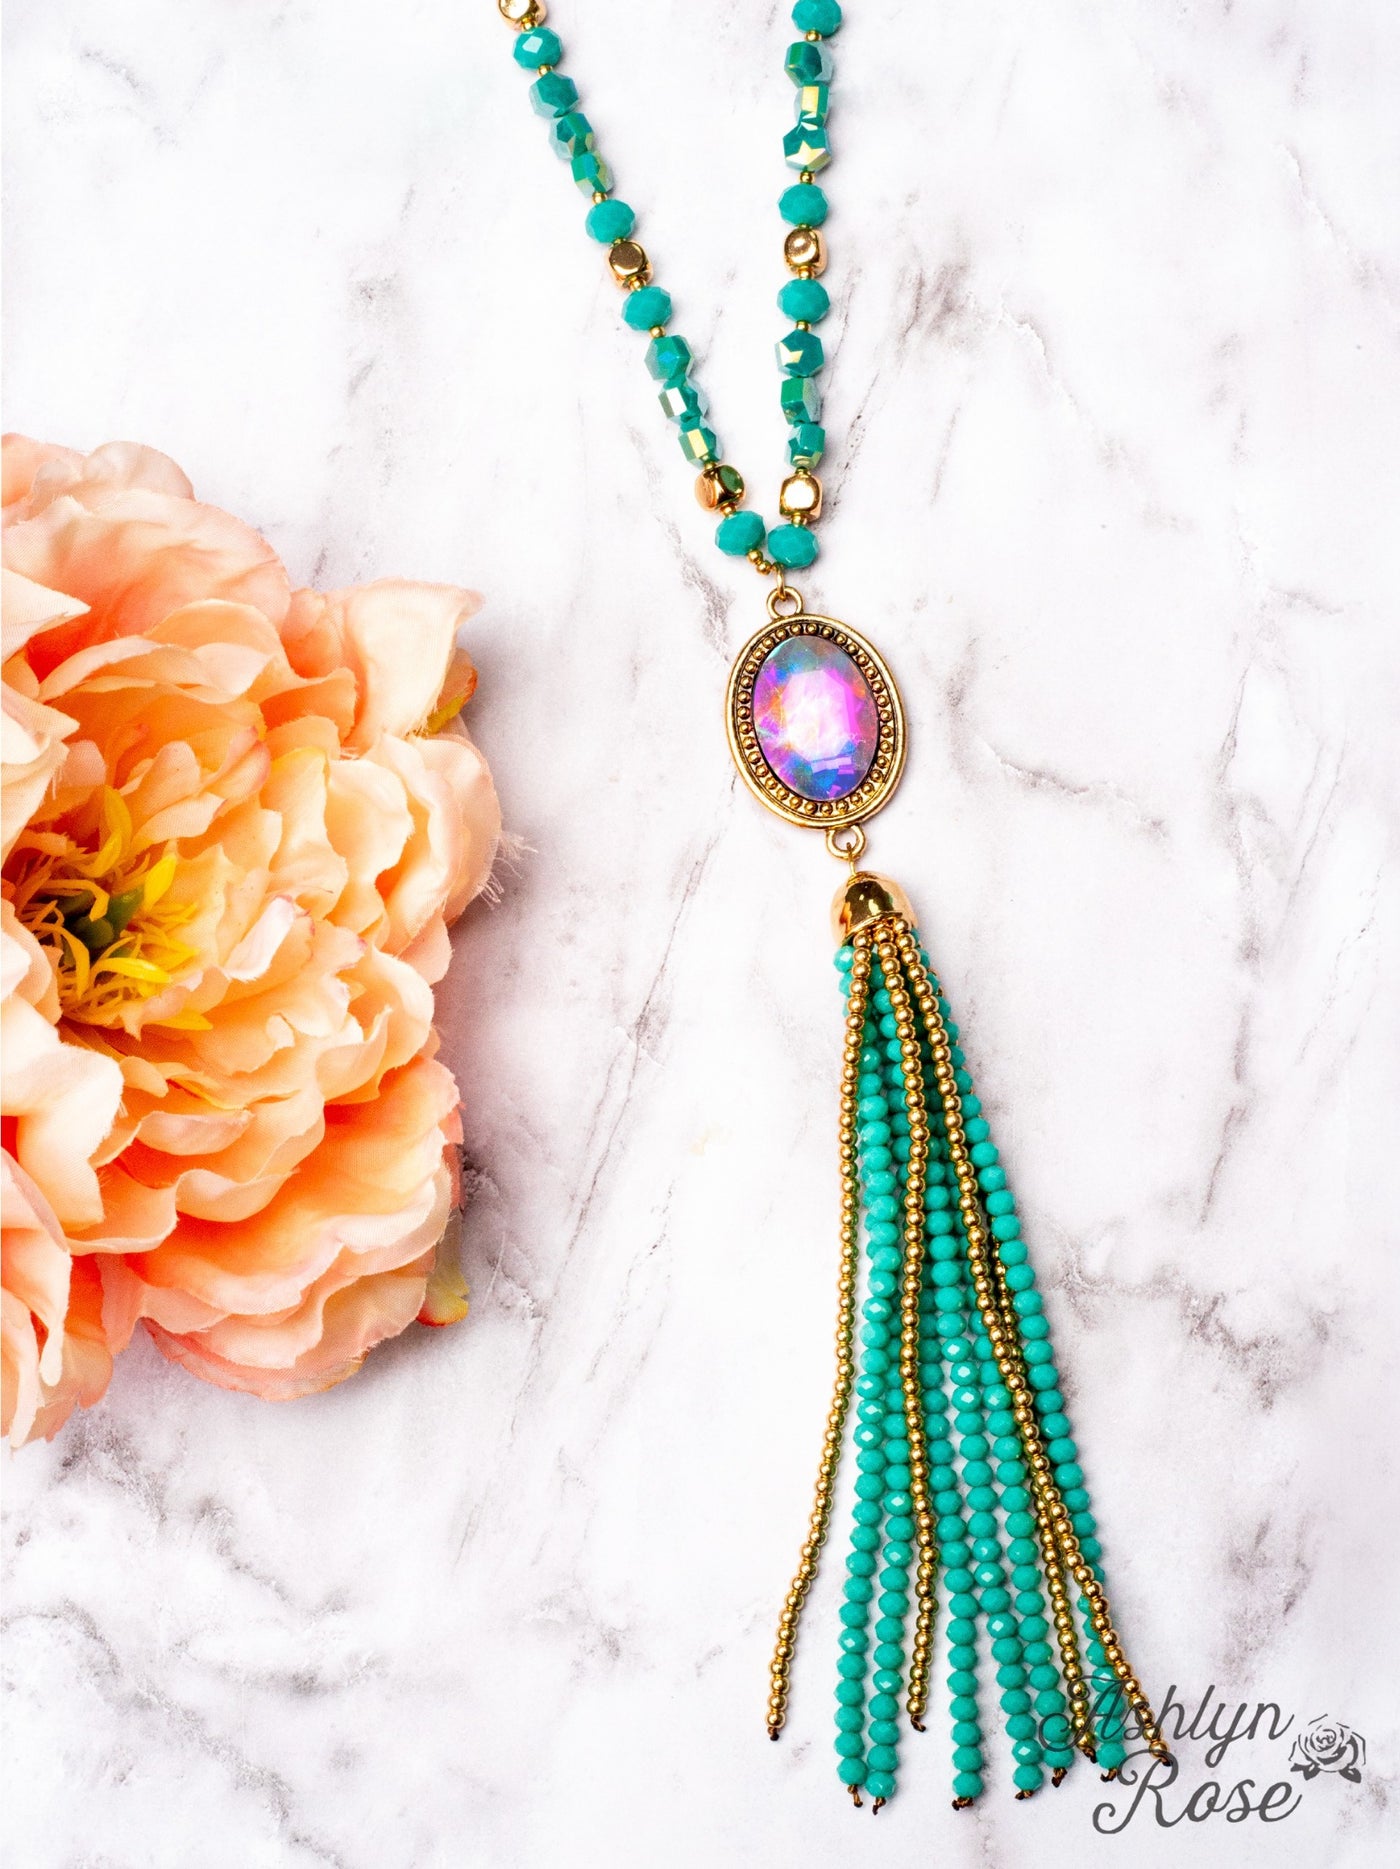 CRASH MY PARTY OVAL IRIDESCENT CRYSTAL BEADED TASSEL PENDANT ON A CRYSTAL BEADED GOLD LINKED CHAIN NECKLACE, TURQUOISE